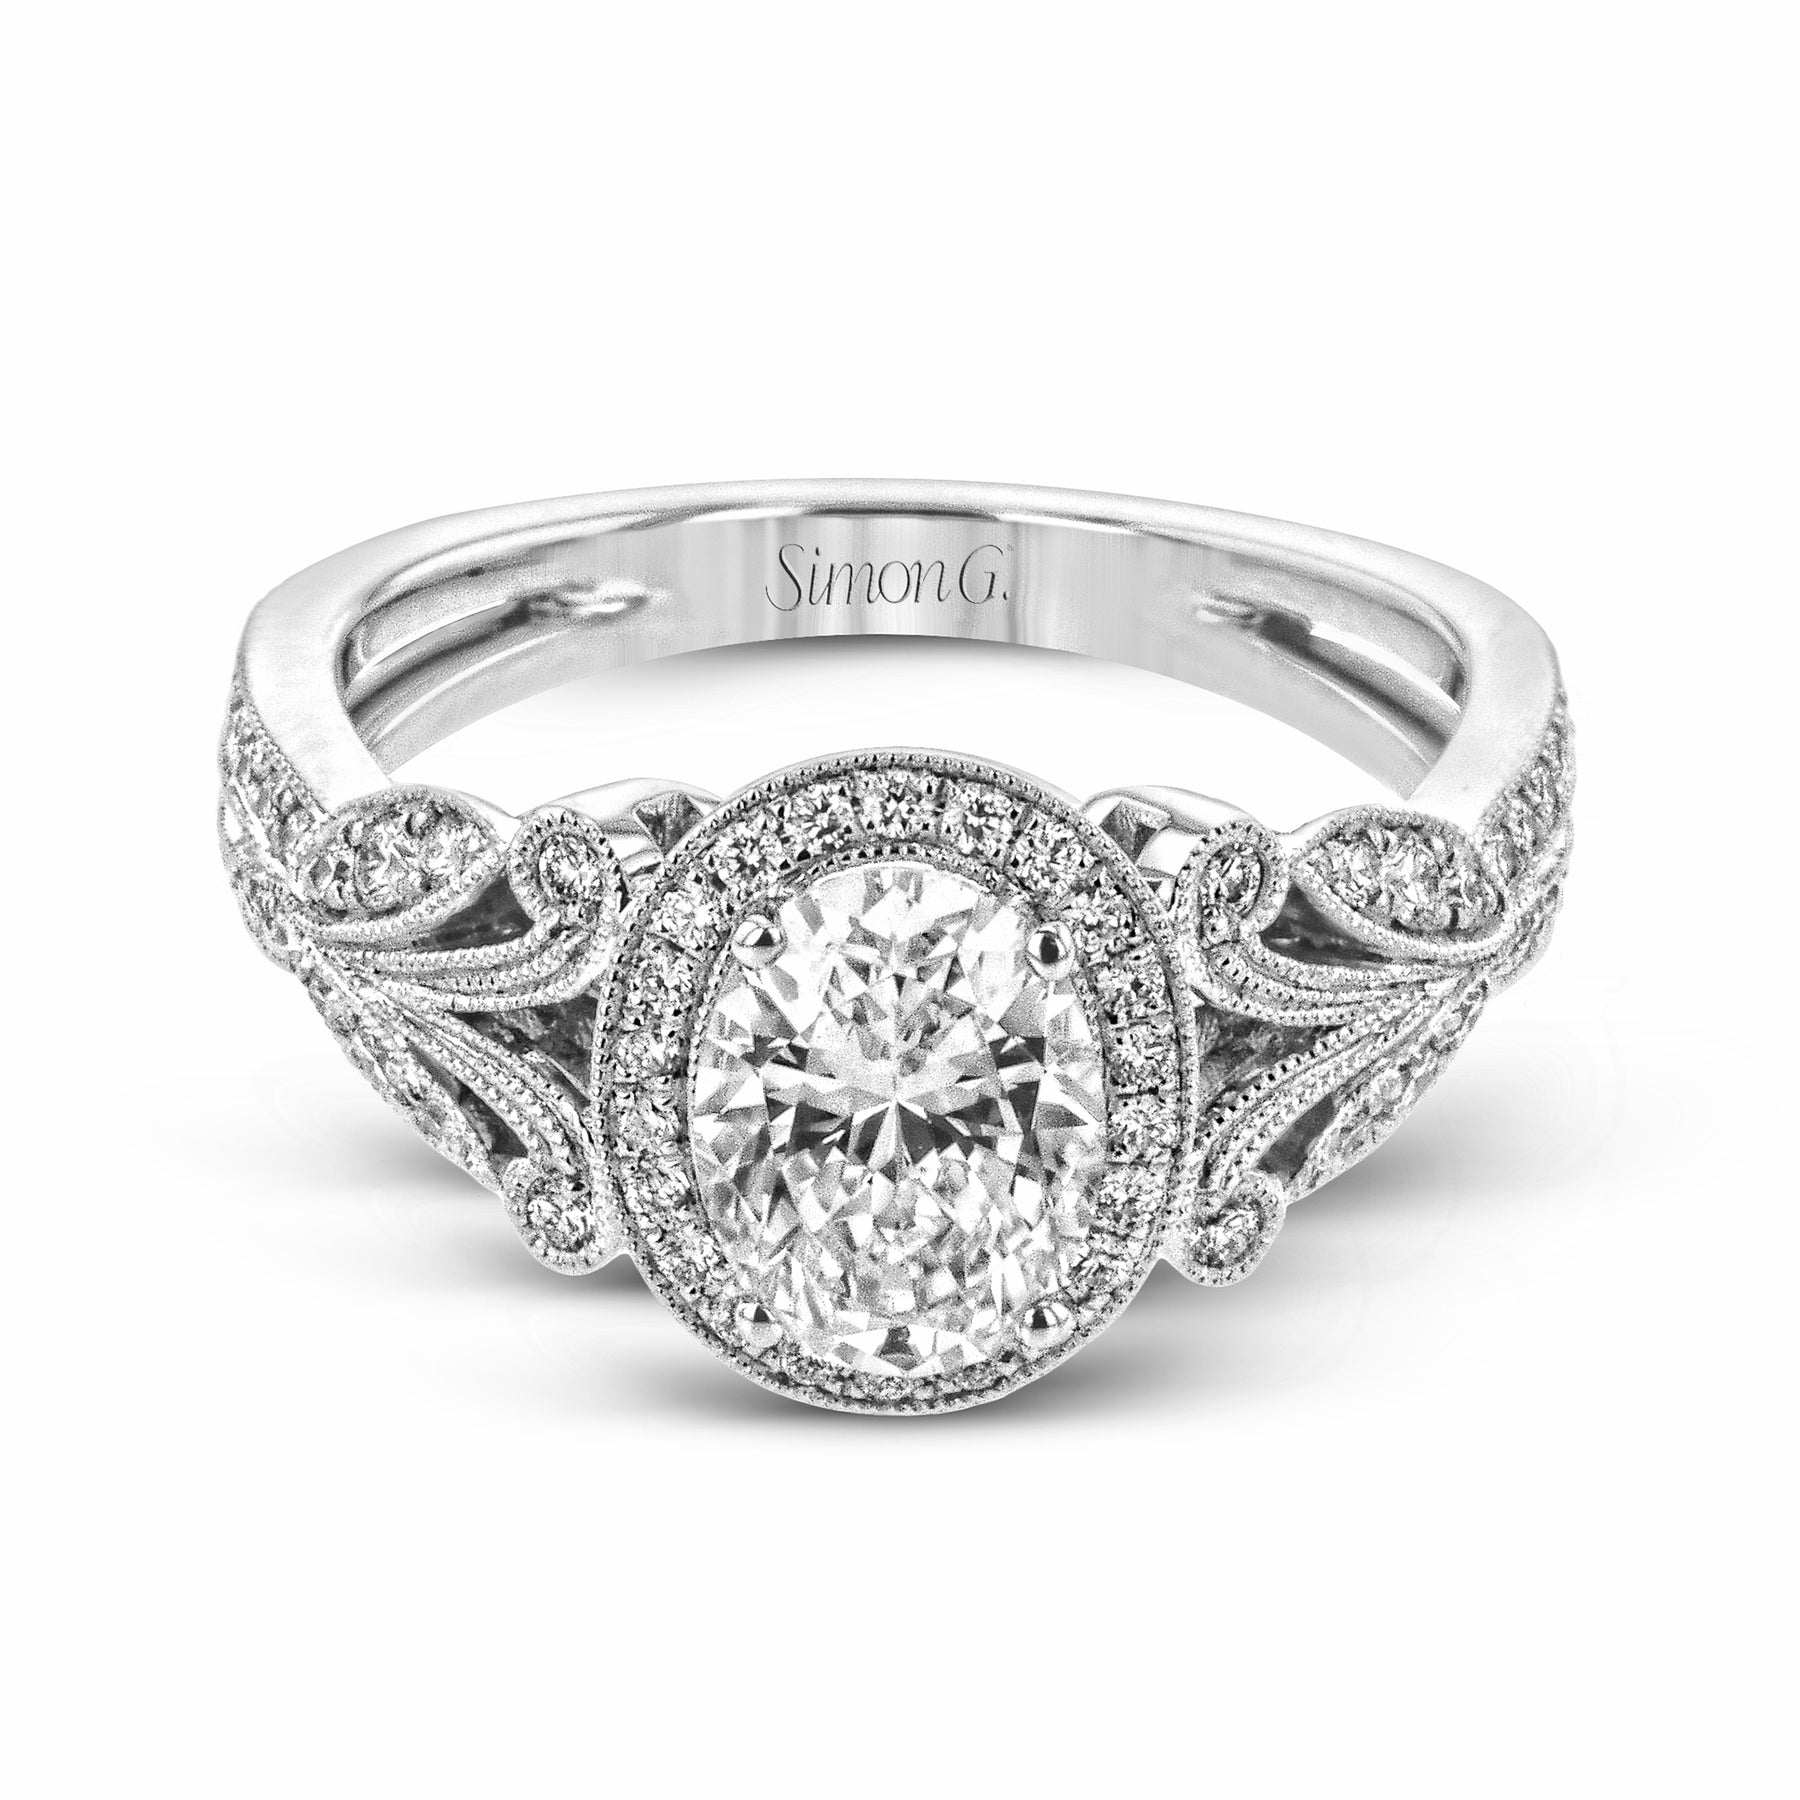 Oval-Cut Halo Engagement Ring In 18k Gold With Diamonds TR629-OV